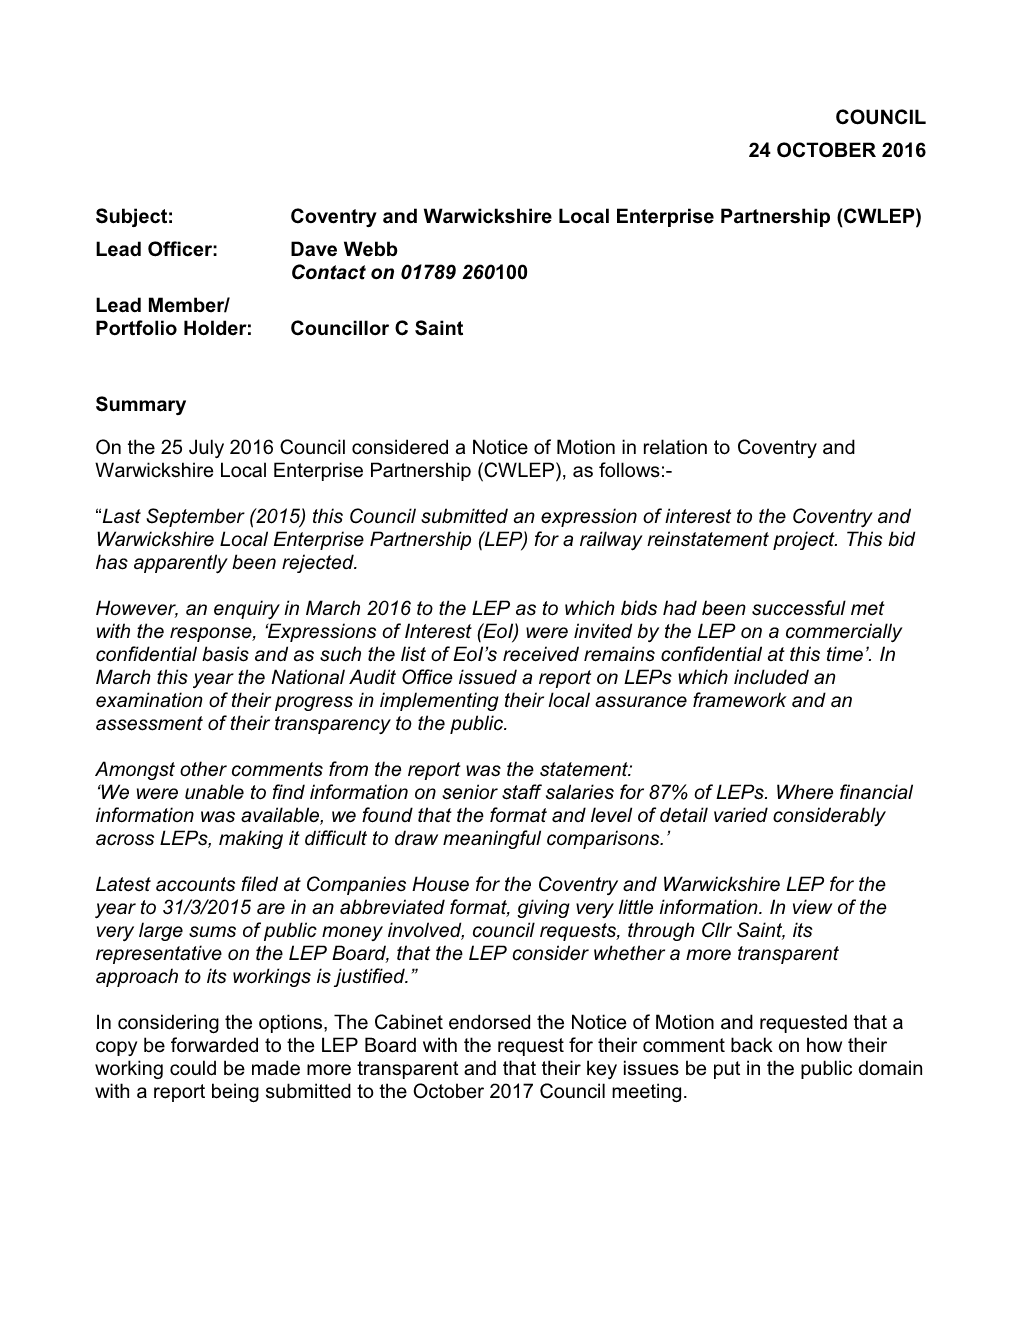 Subject:Coventry and Warwickshire Local Enterprise Partnership (CWLEP)